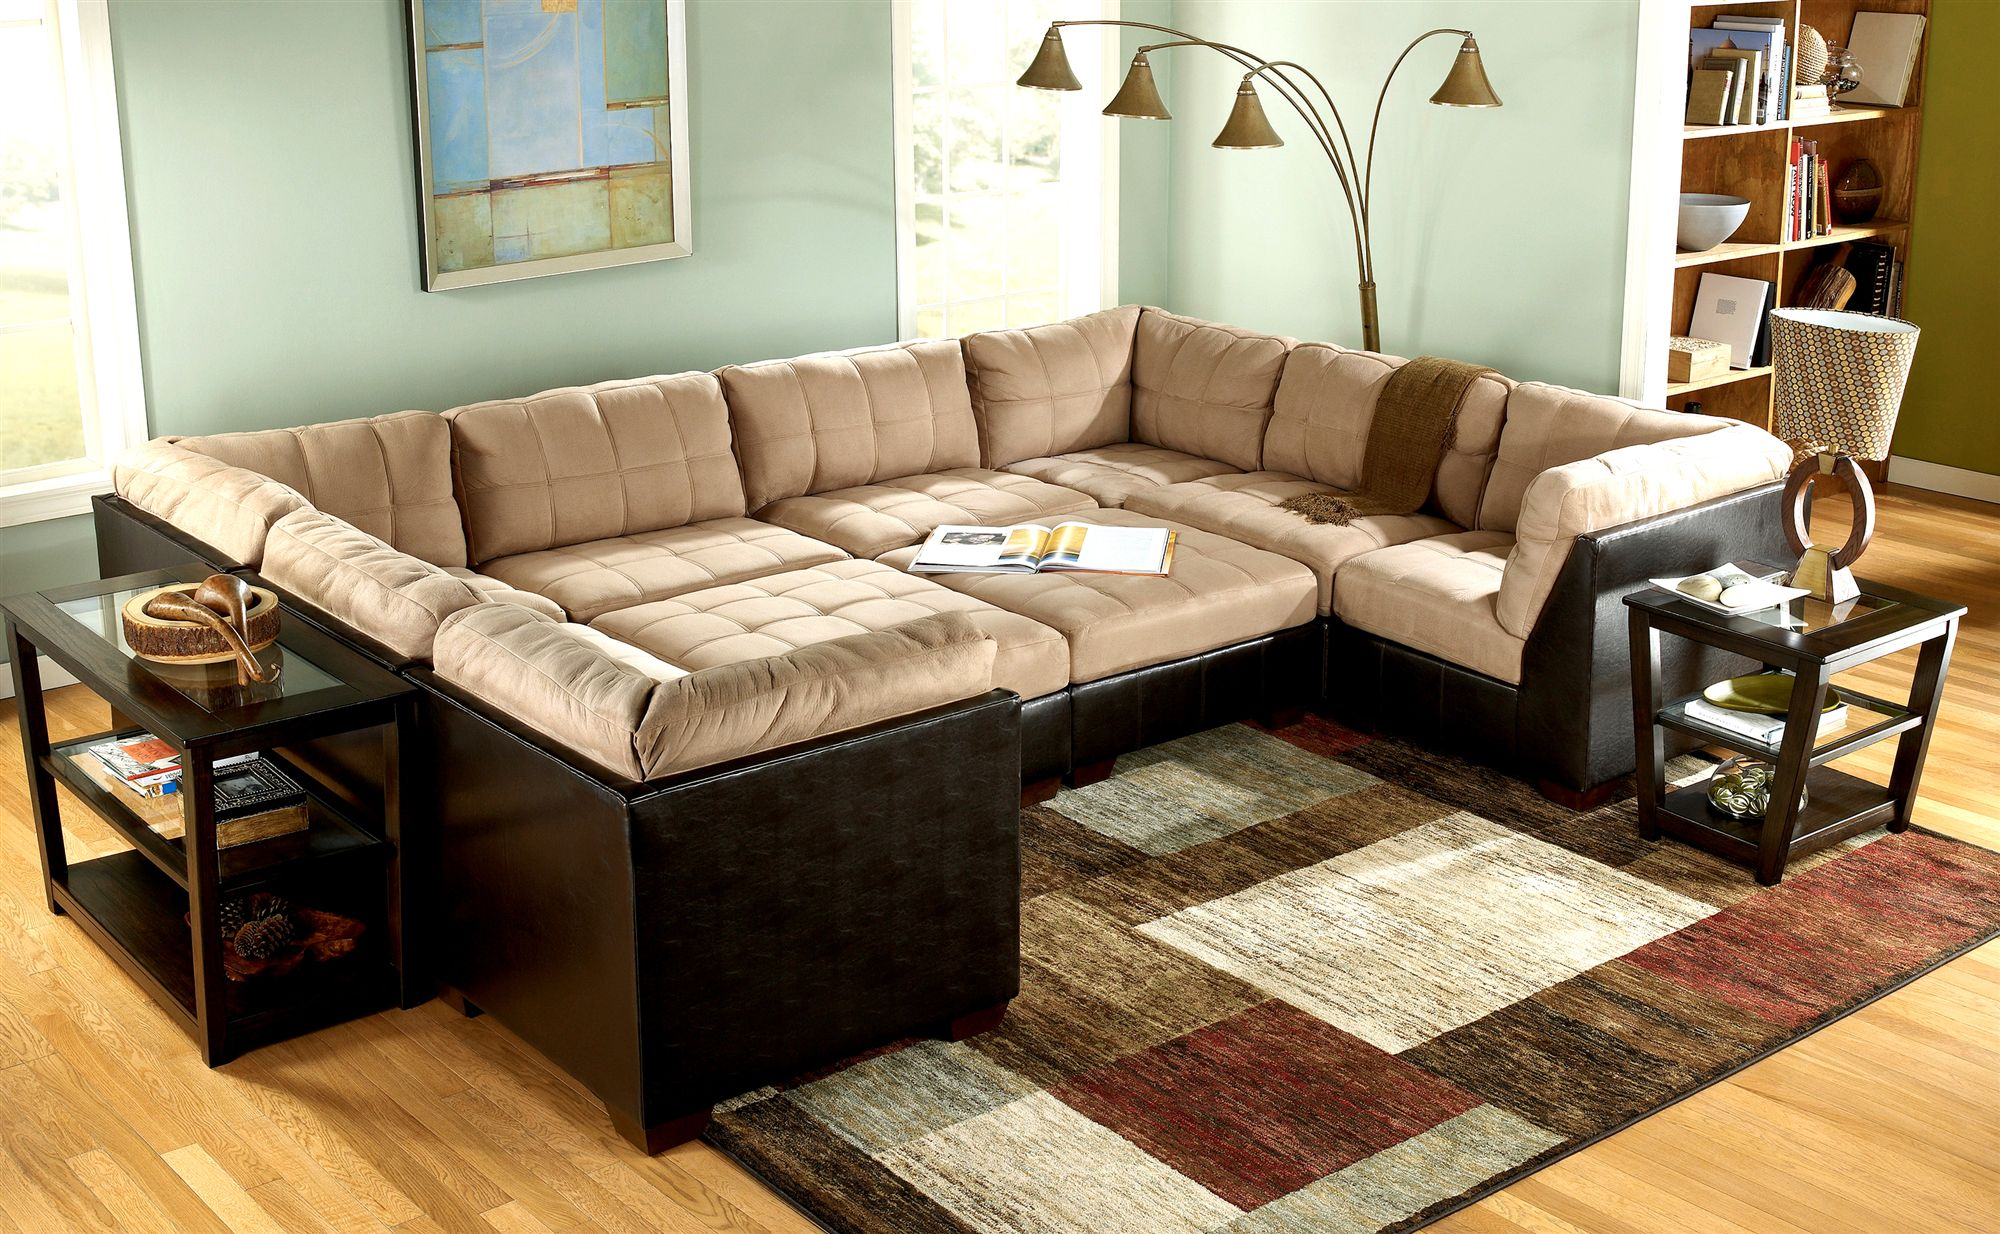 Furniture Cool Sectional Couch Design With Rugs And Floor inside dimensions 2000 X 1234